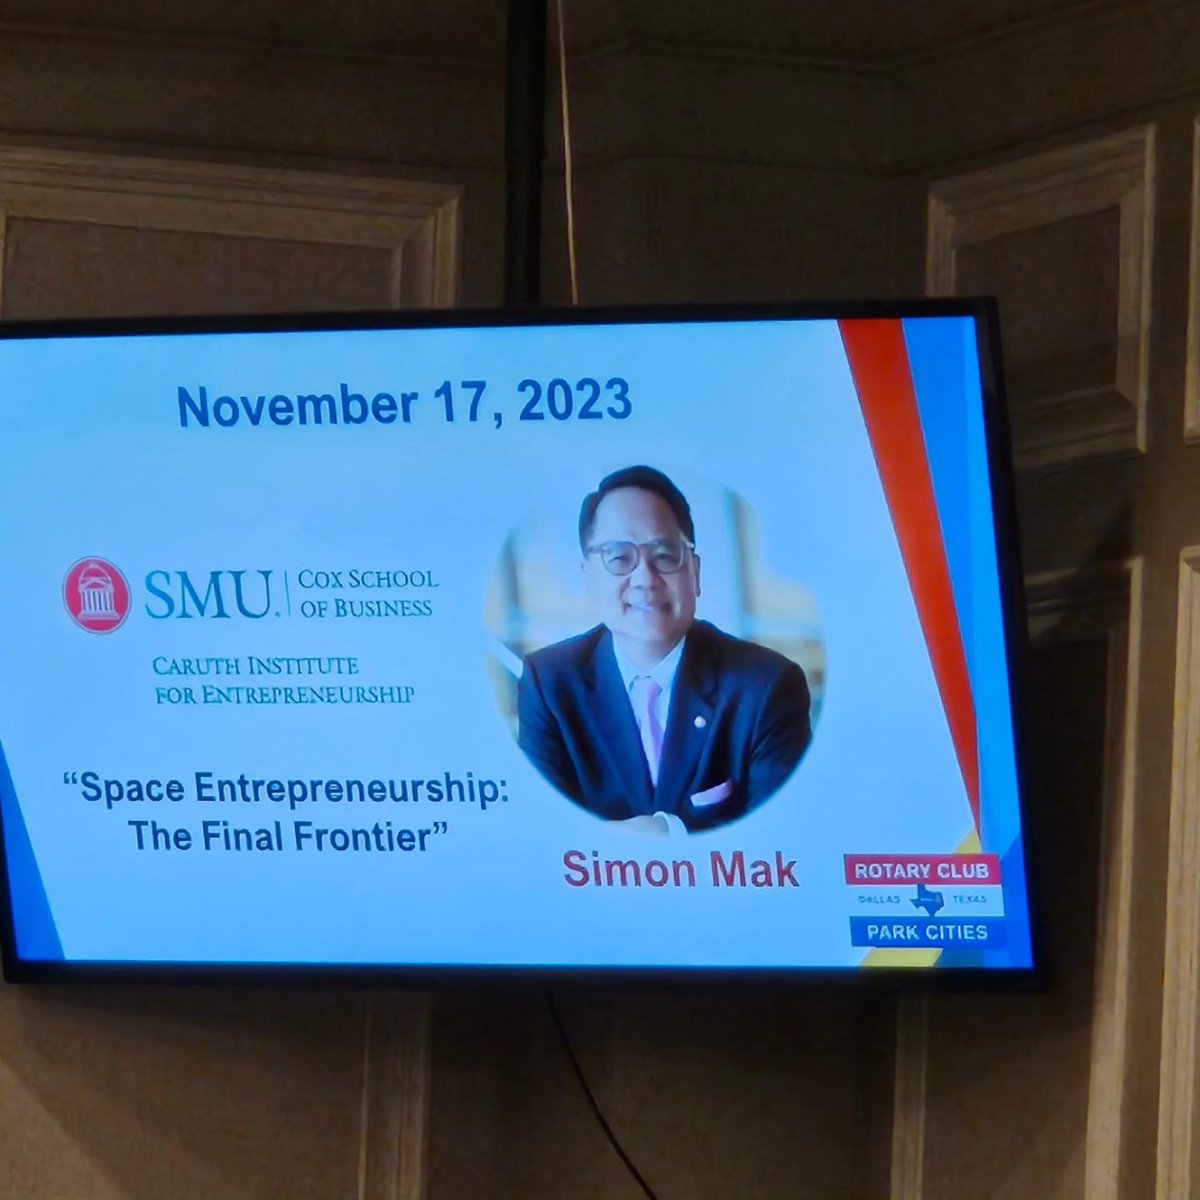 Fun time speaking on #SpaceEntrepreneurship with my @SMUCox SMU students Avery Zolfaghari and David Hudgins II pitching their space #startup idea Rocket Roast to the Park Cities Rotary Club